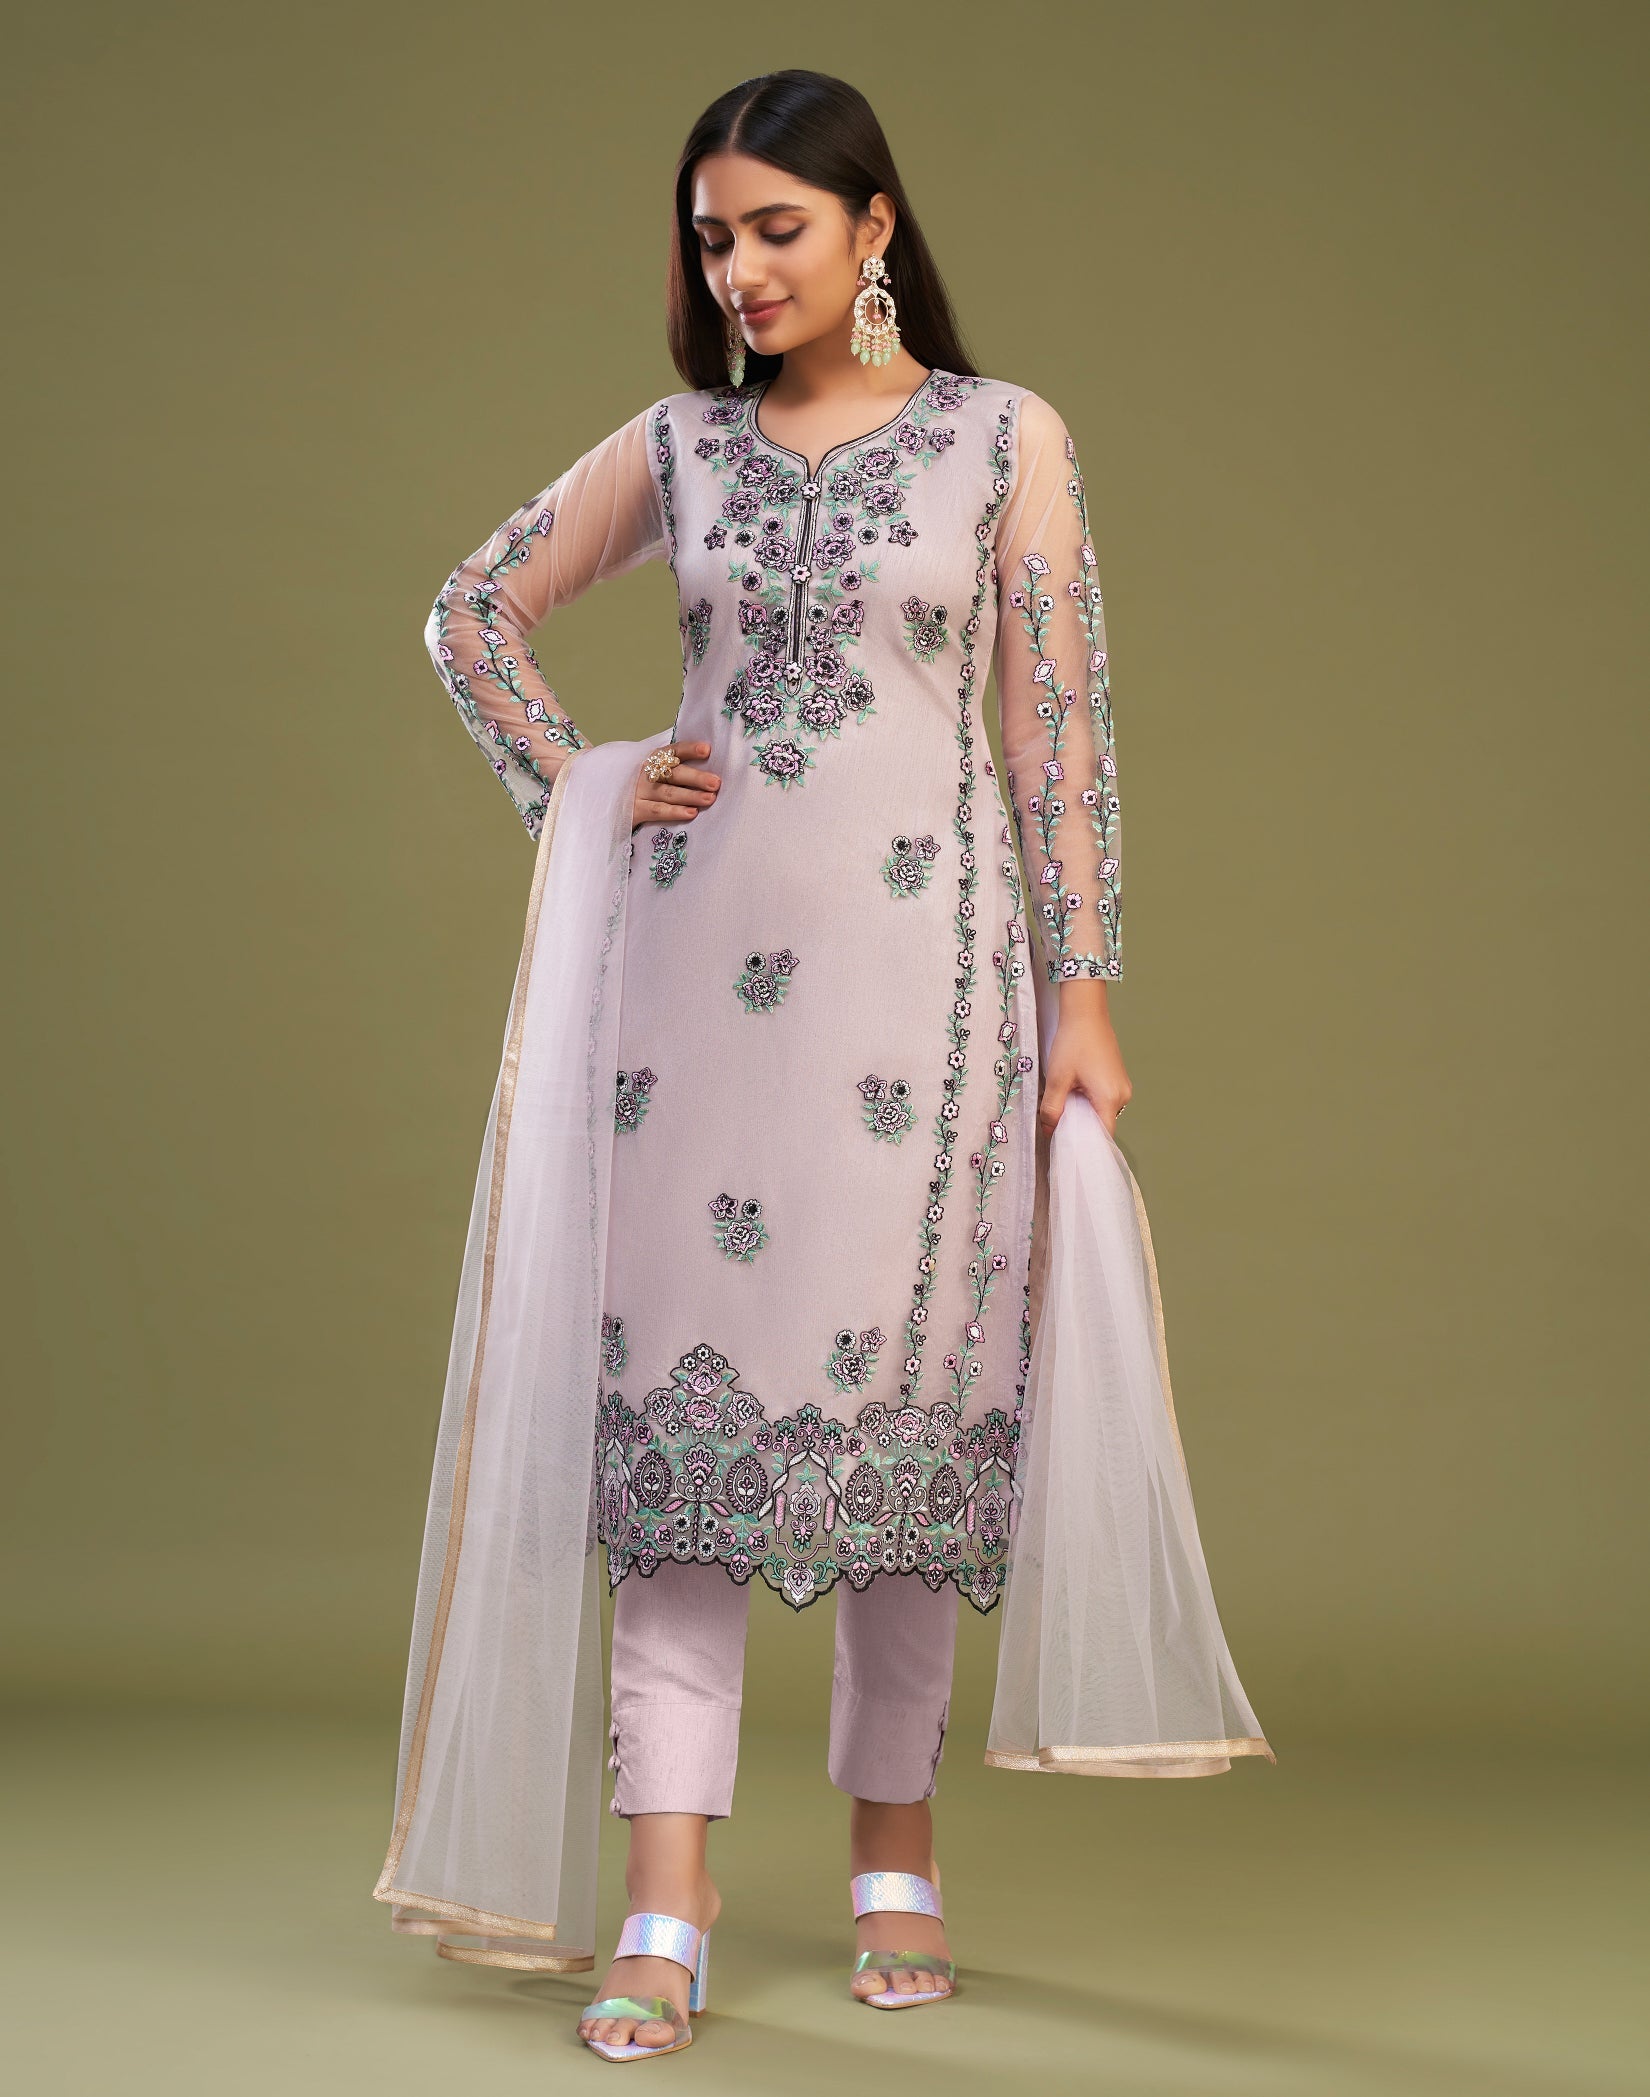 Pink Salwar Suit with Exquisite Multi-Thread Embroidery for Weddings and Parties